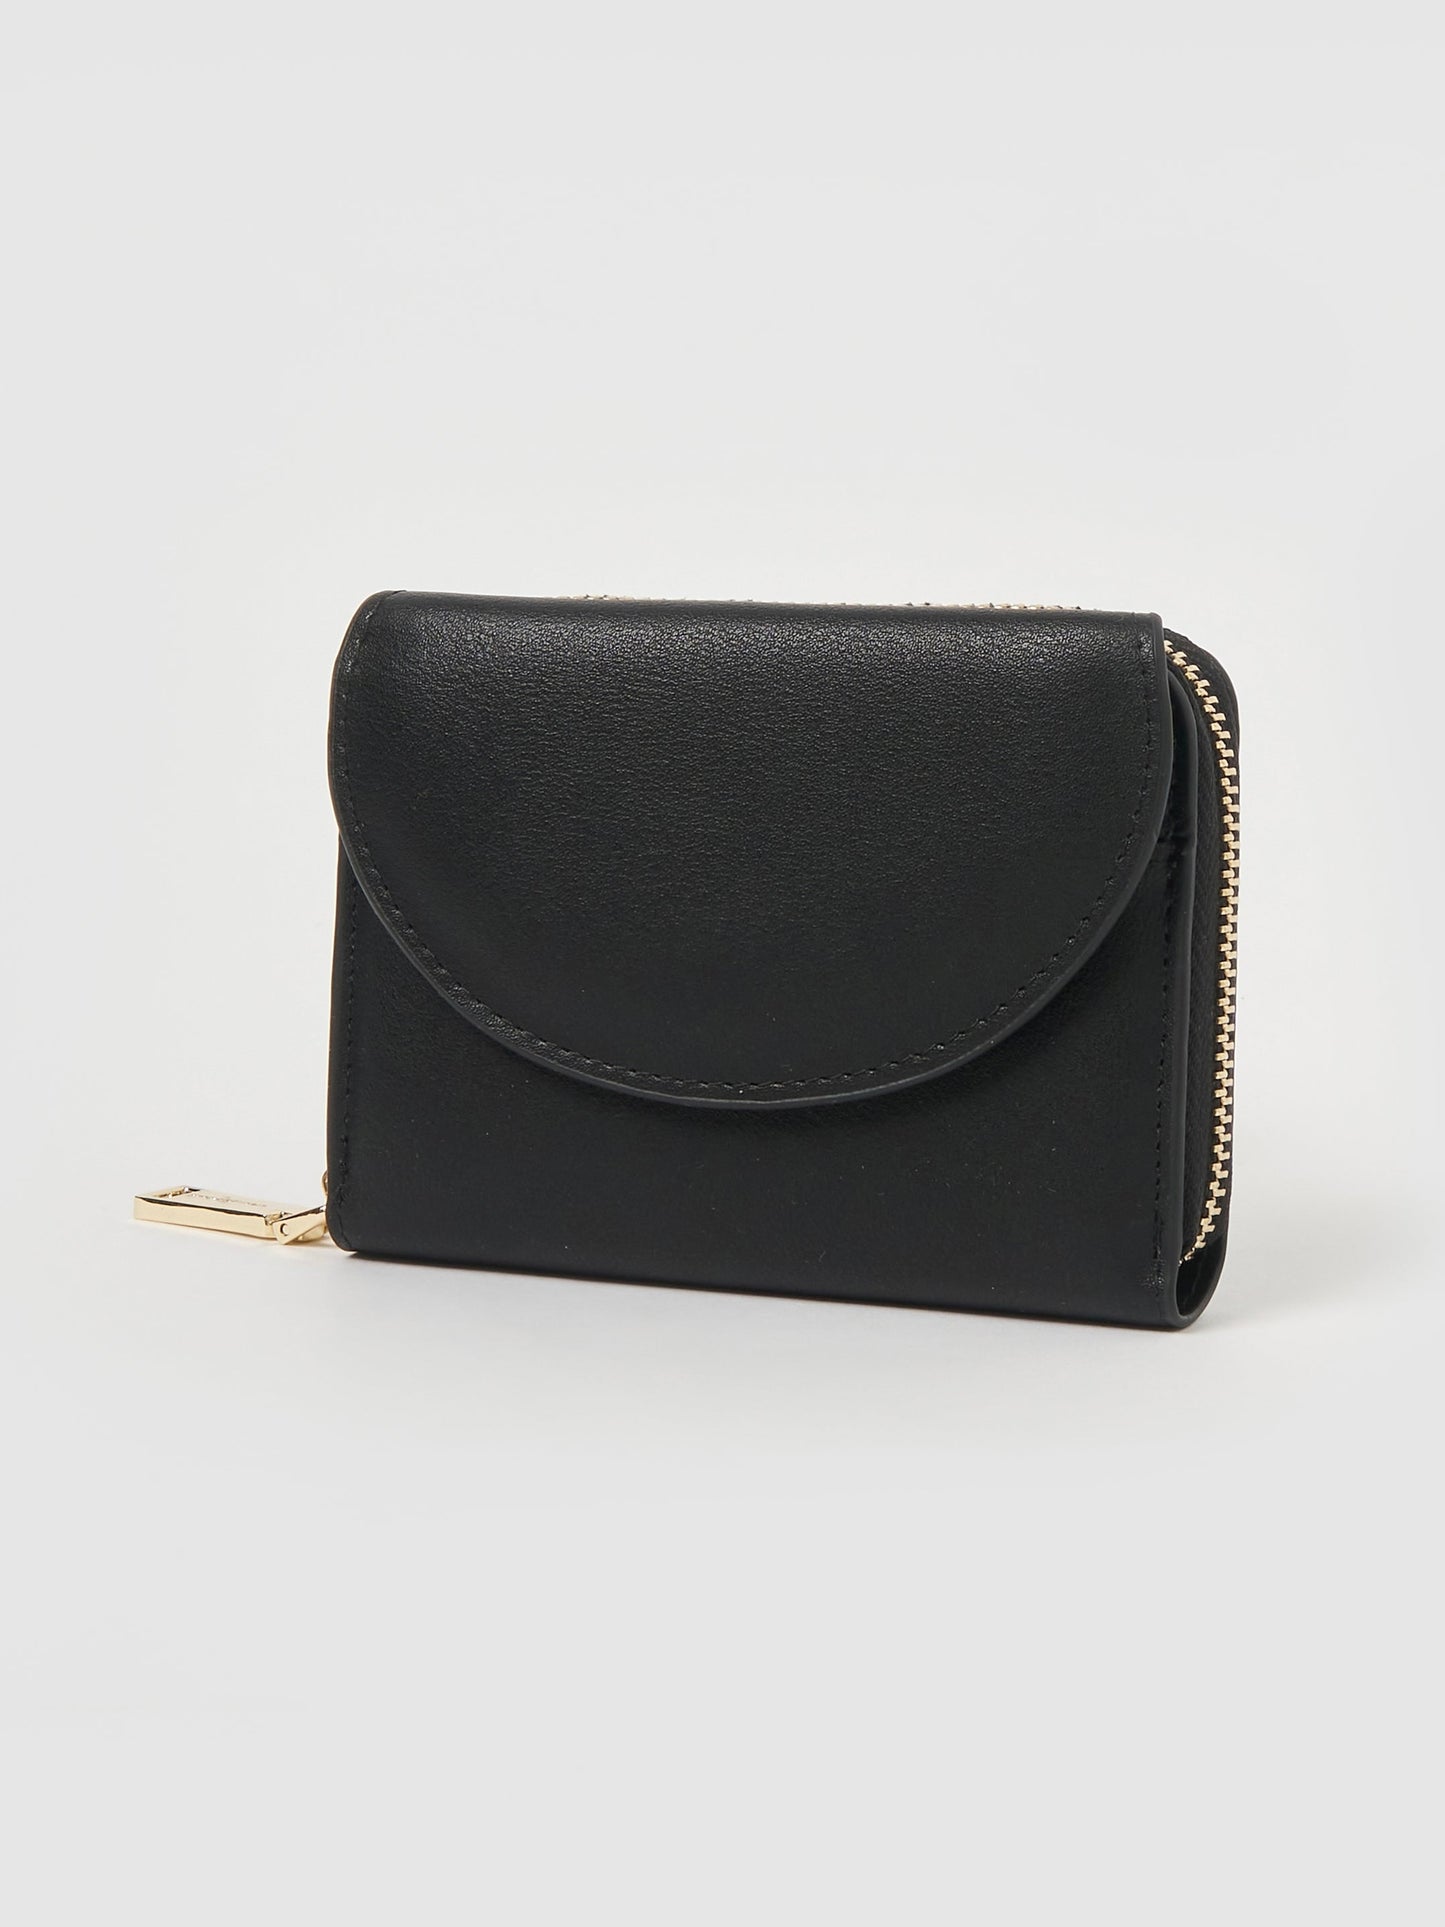 Tranquility Wallet - Black